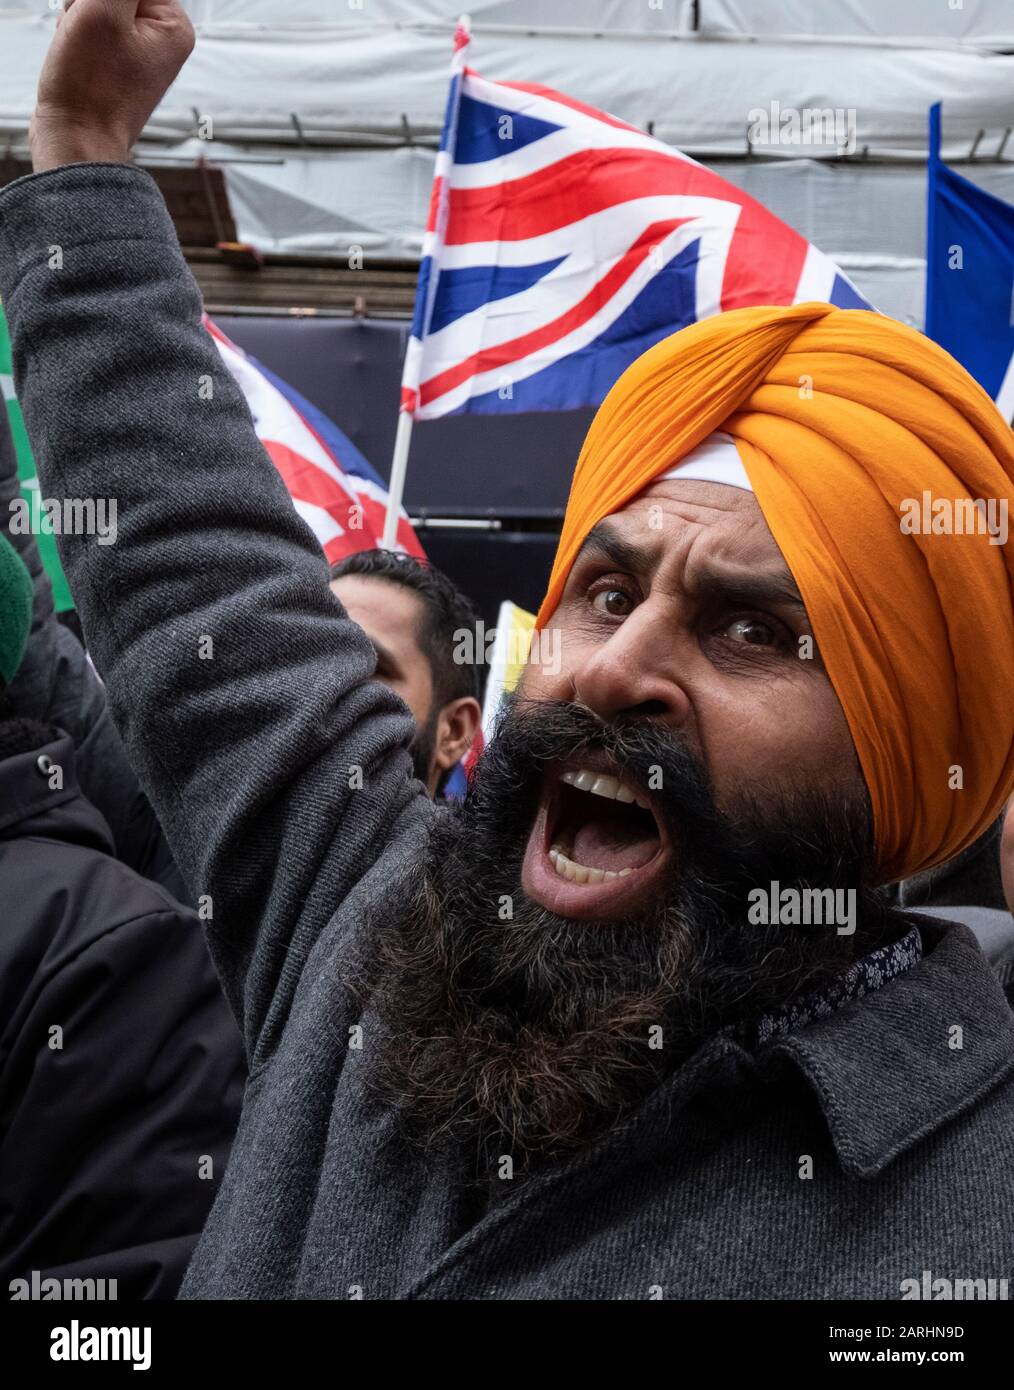 Kashmiris and Sikhs protest outside the Indian High Commission in London  on Republic day 2020. An anti-India protest to tell the world about the discriminatory and racist crimes the Indian State under Modi is comming against Muslims, Sikhs, Christians , Dalits etc. 26 Jan 2020 Stock Photo